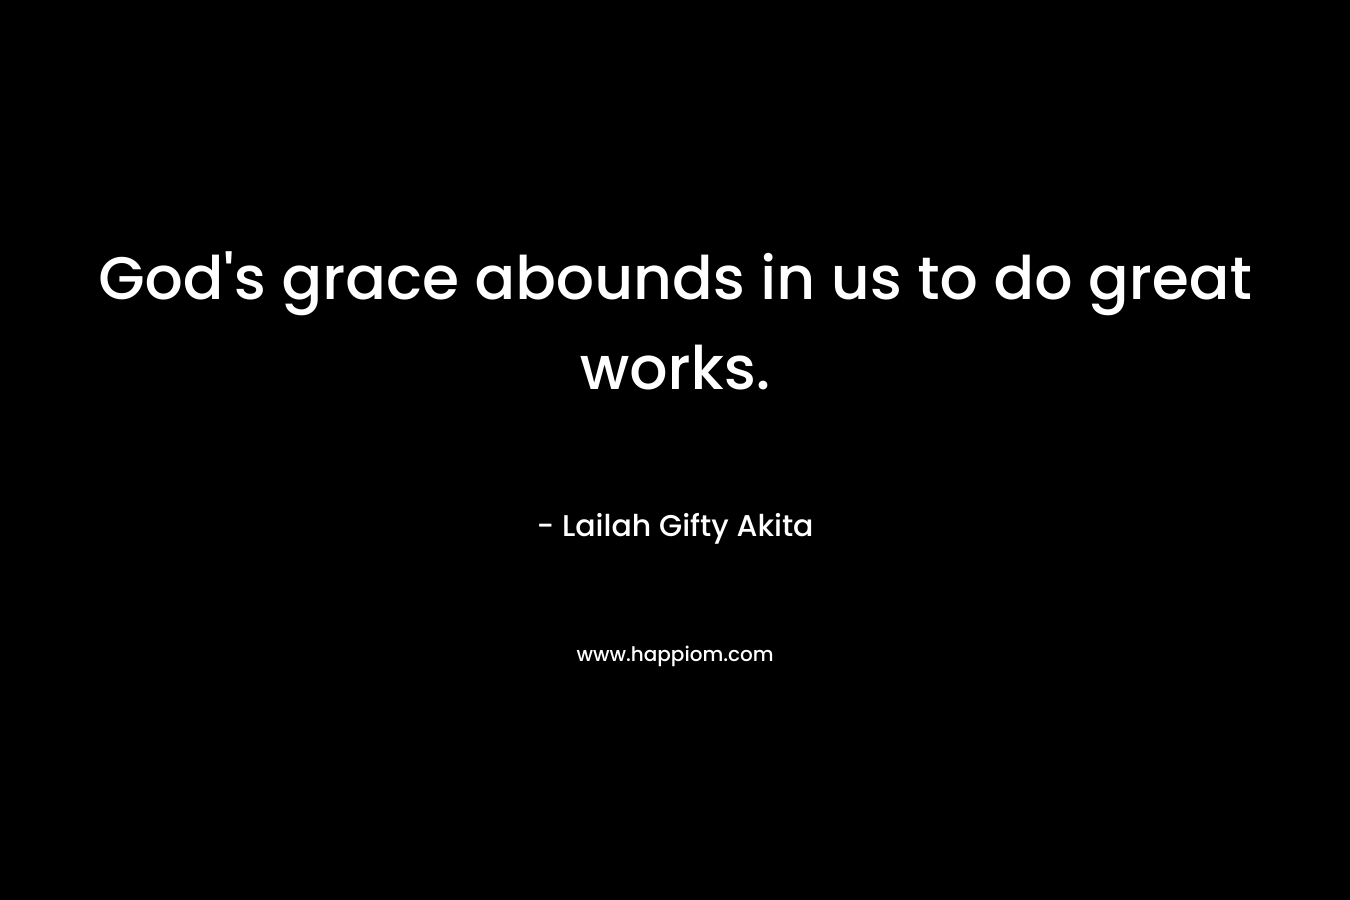 God's grace abounds in us to do great works.